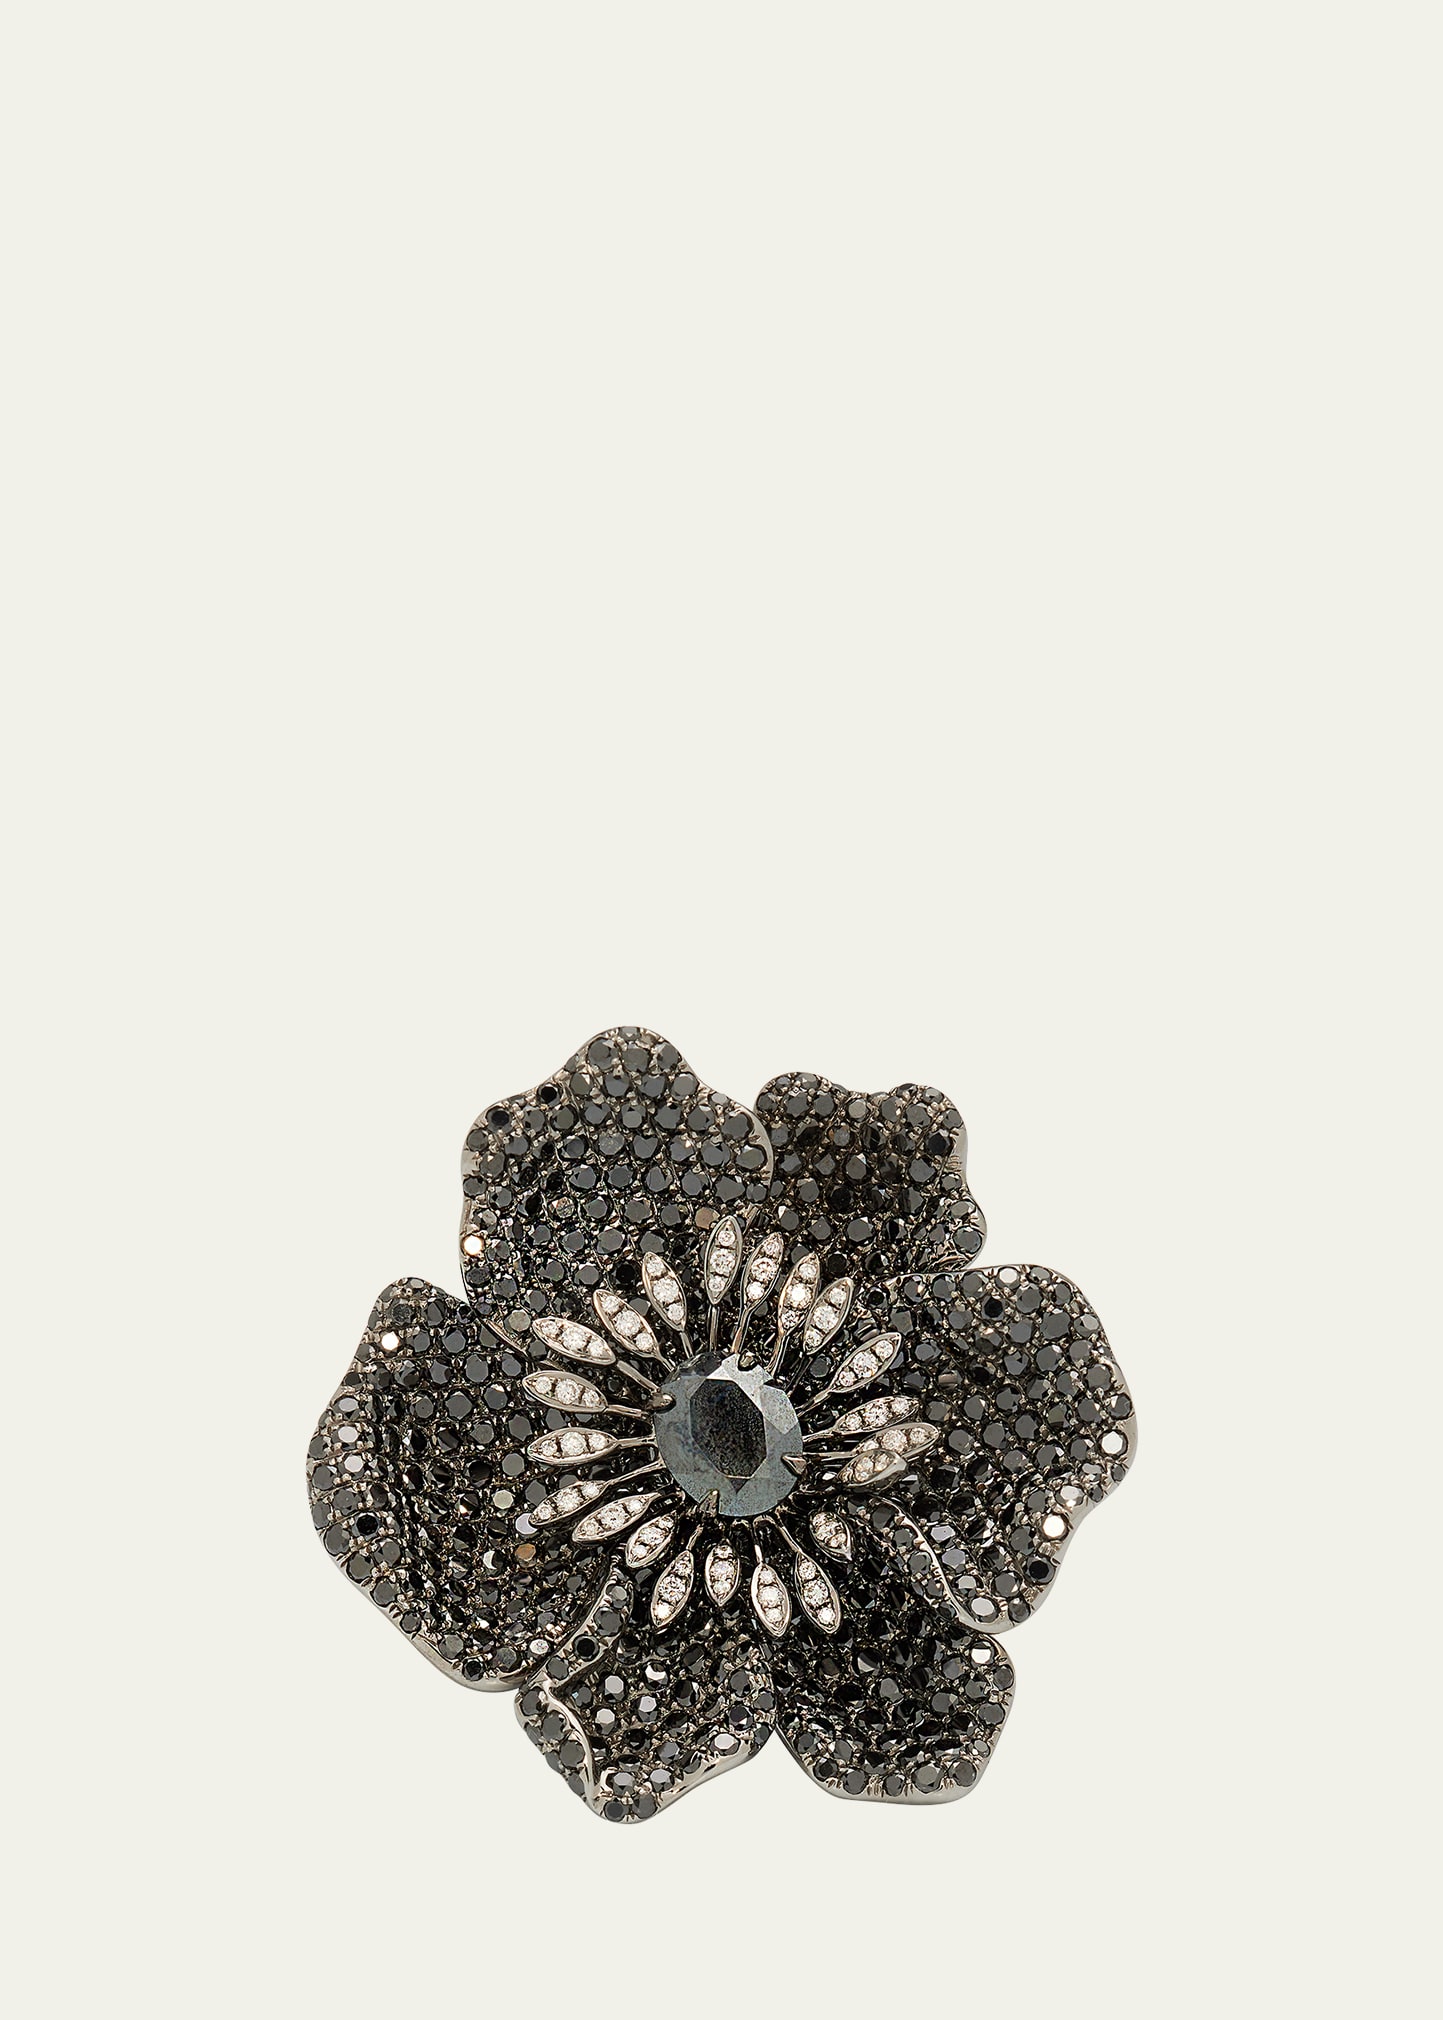 White Gold Black Diamond and Hematite Ring from The Flower Collection